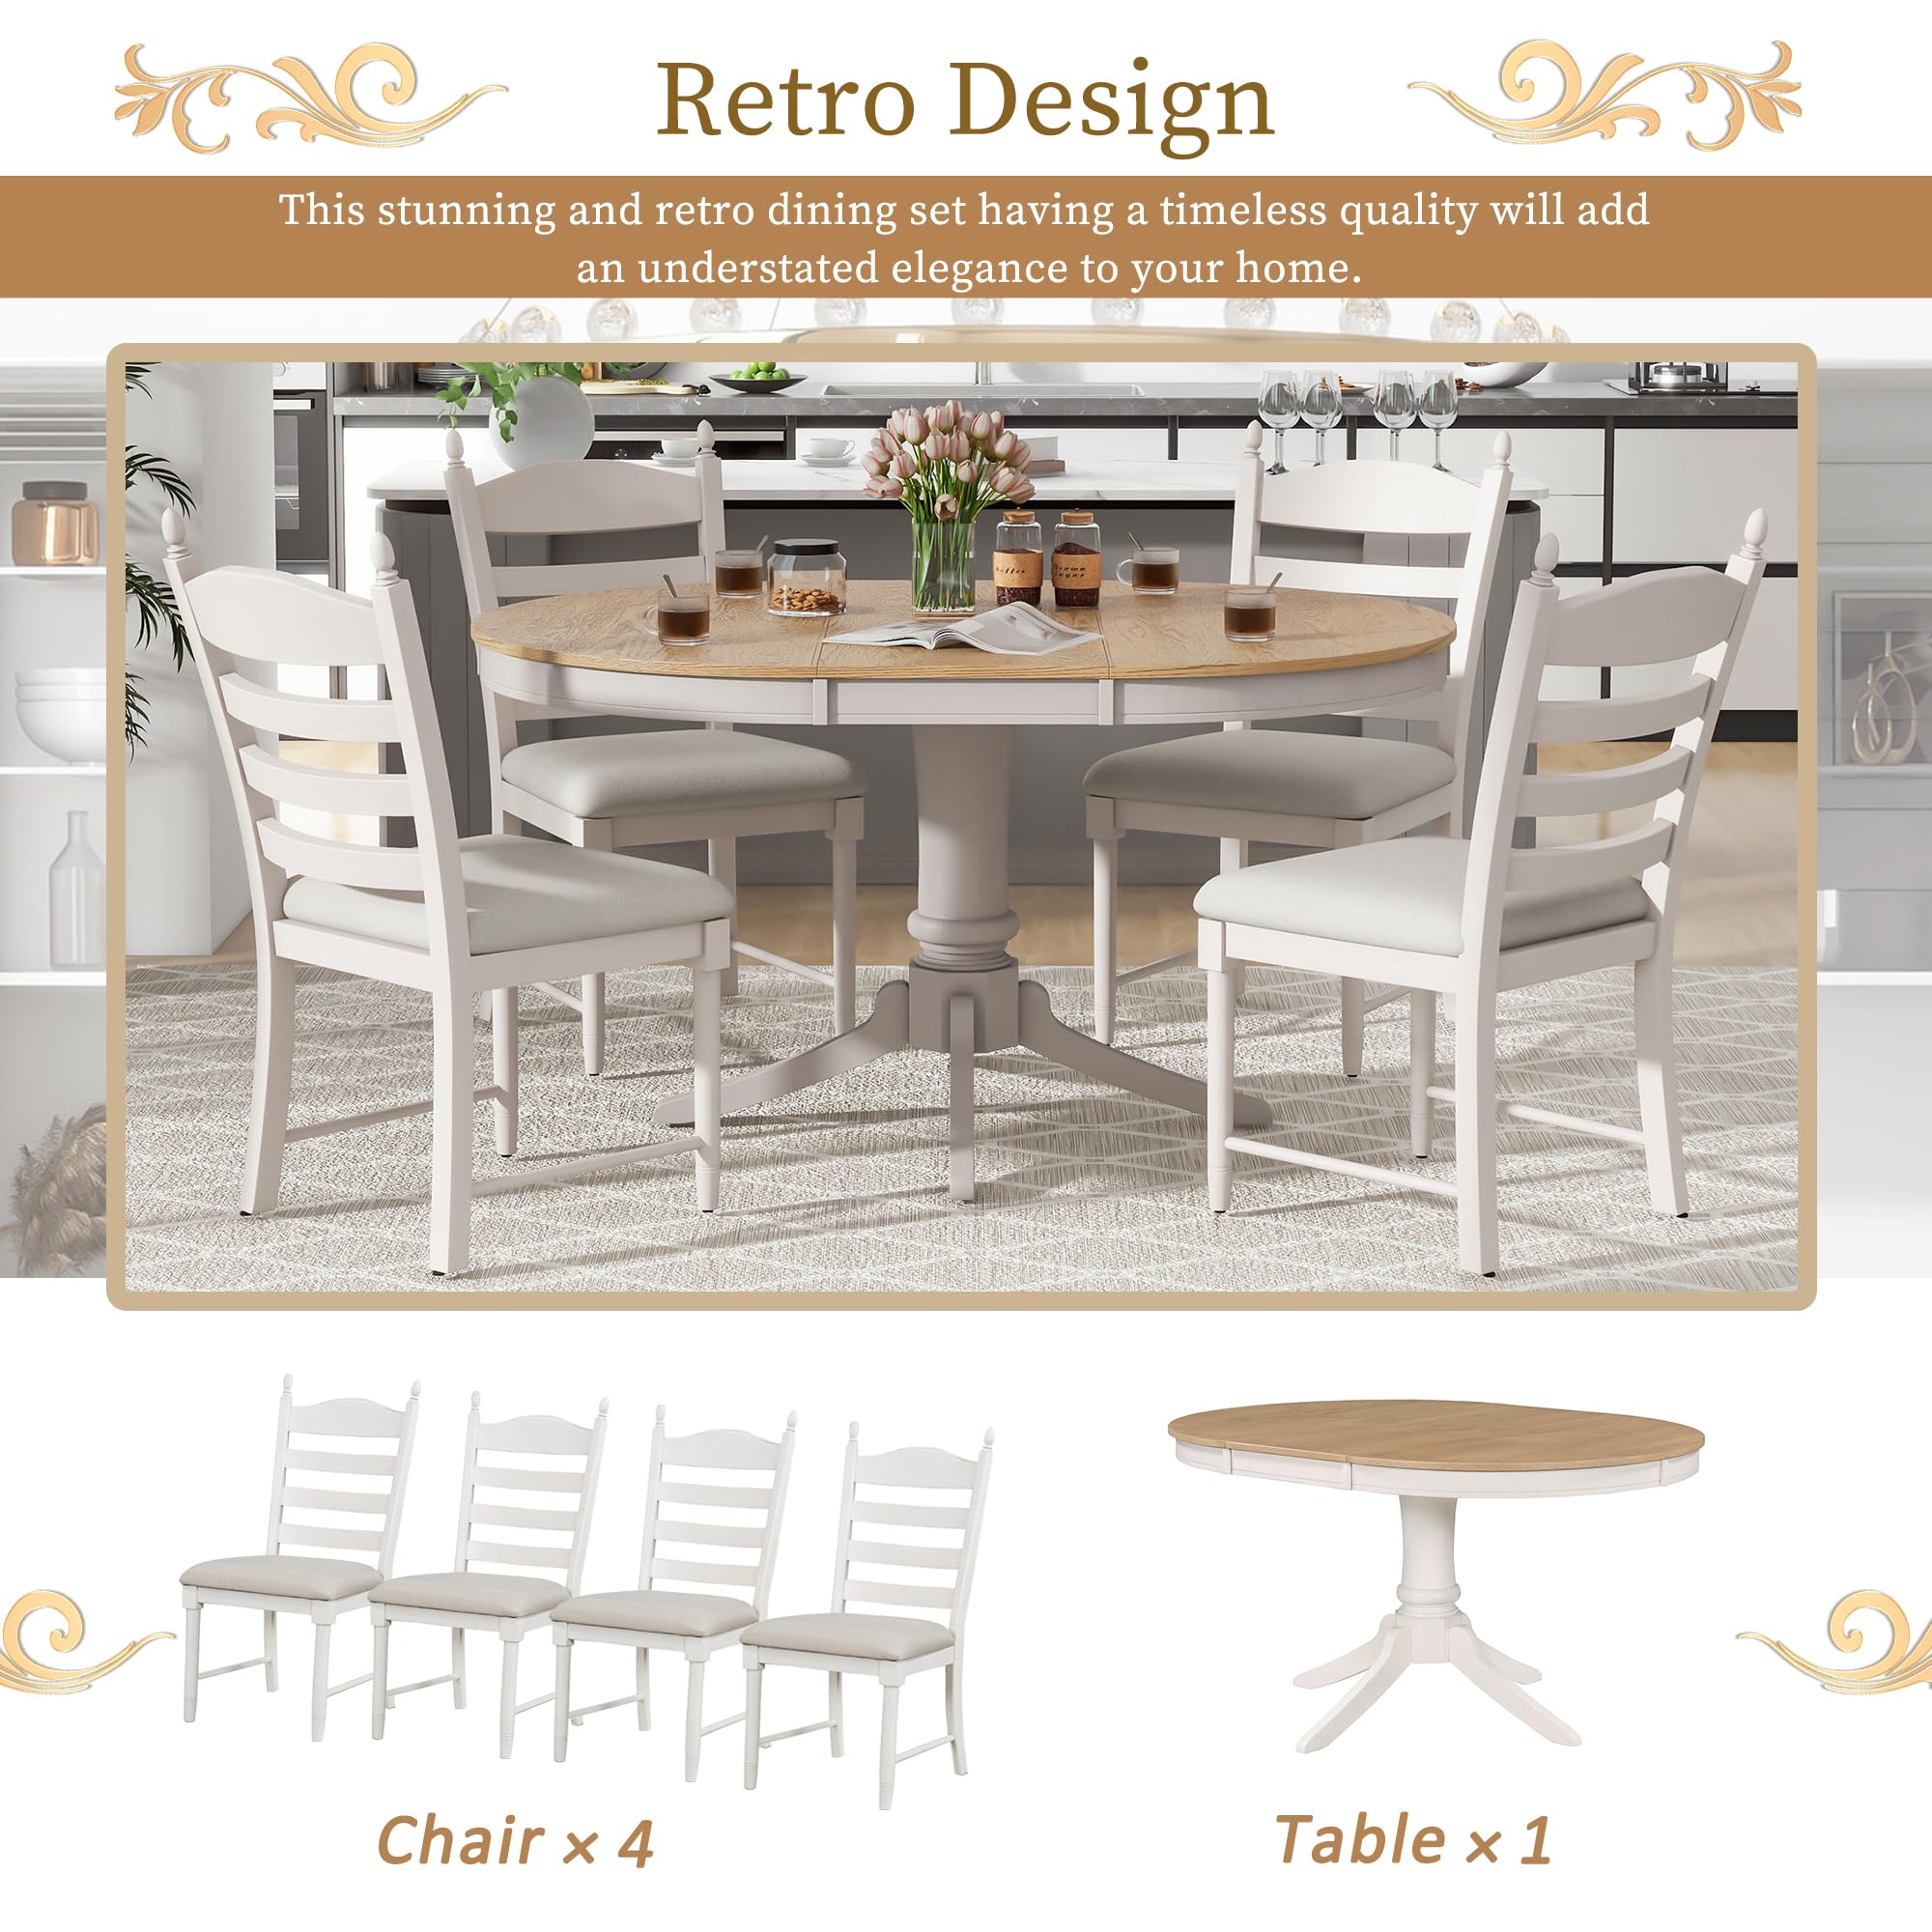 LUMISOL 5 Piece Round Extendable Dining Room Table Set with Chairs for Small Space of 4-6 Persons, Solid Wood Round Kitchen Dining Furniture Table Set with Upholstered Chairs, Farmhouse Dining Set